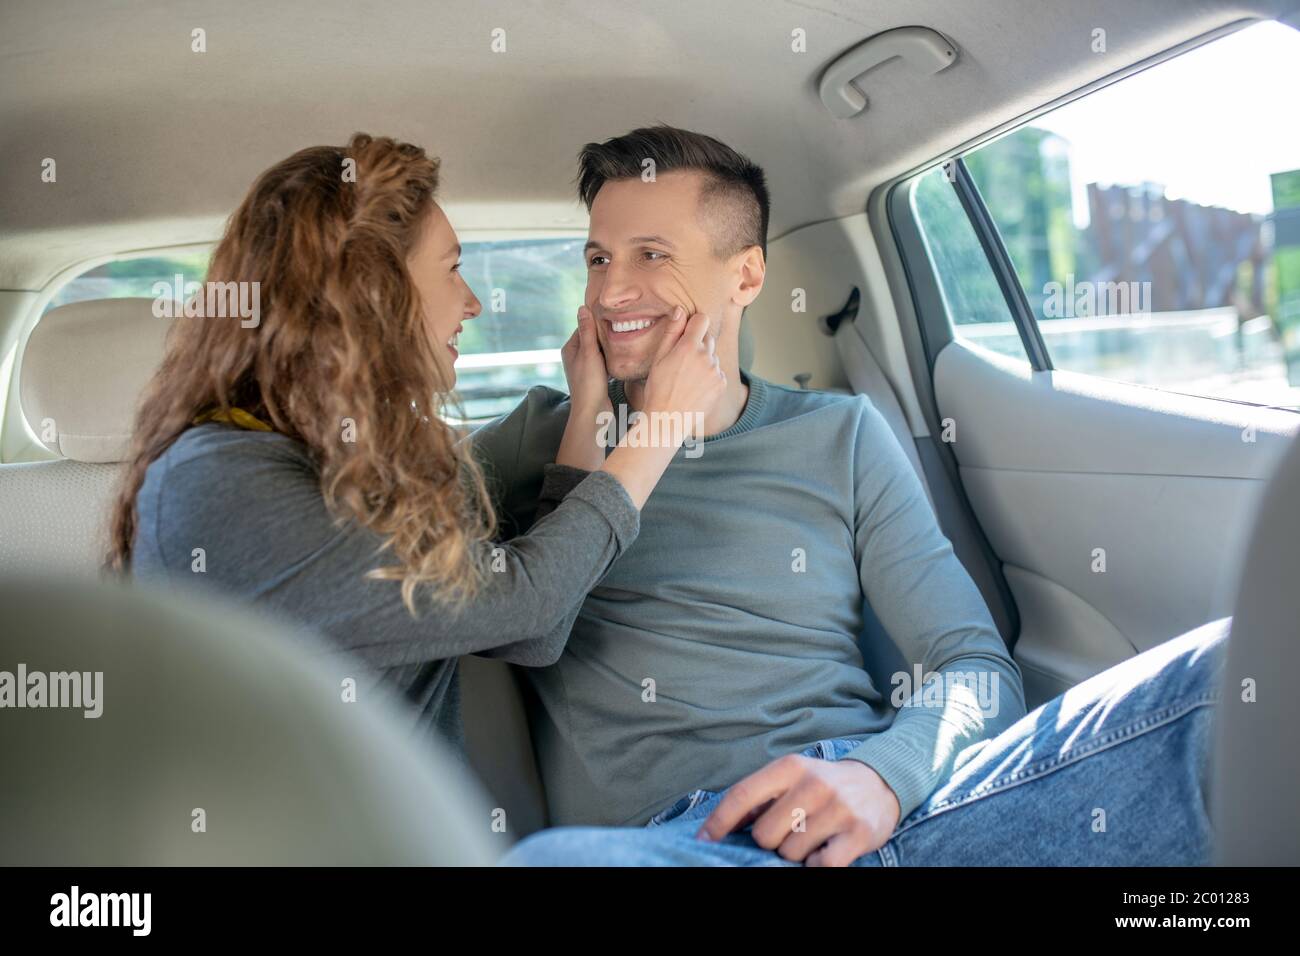 Cheerful pretty woman touching smiling mans face Stock Photo